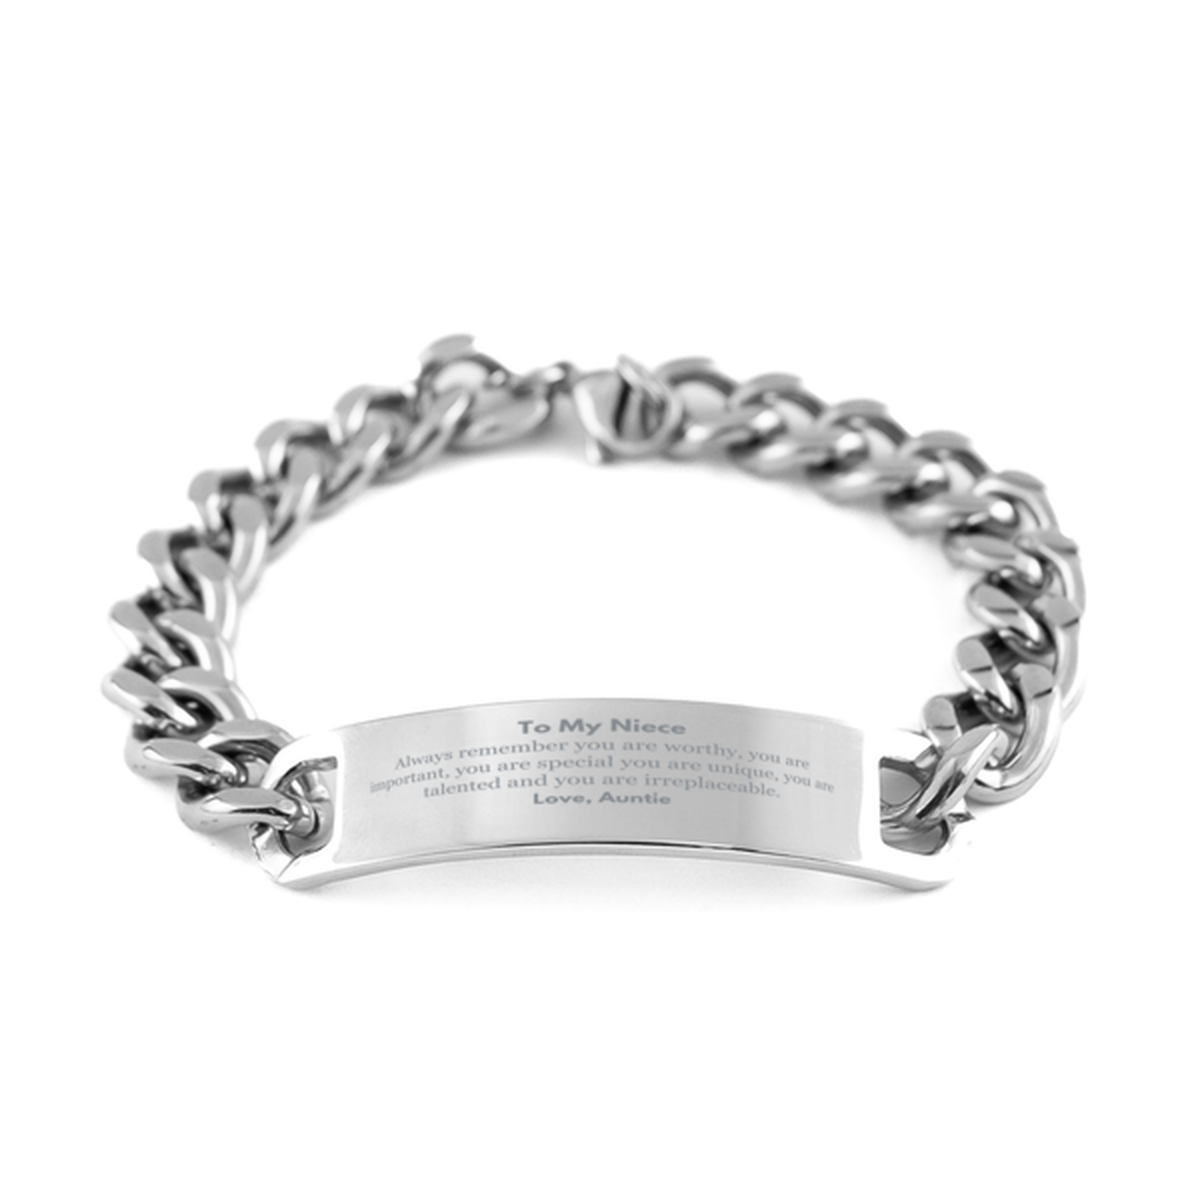 Niece Birthday Gifts from Auntie, Inspirational Cuban Chain Stainless Steel Bracelet for Niece Christmas Graduation Gifts for Niece Always remember you are worthy, you are important. Love, Auntie